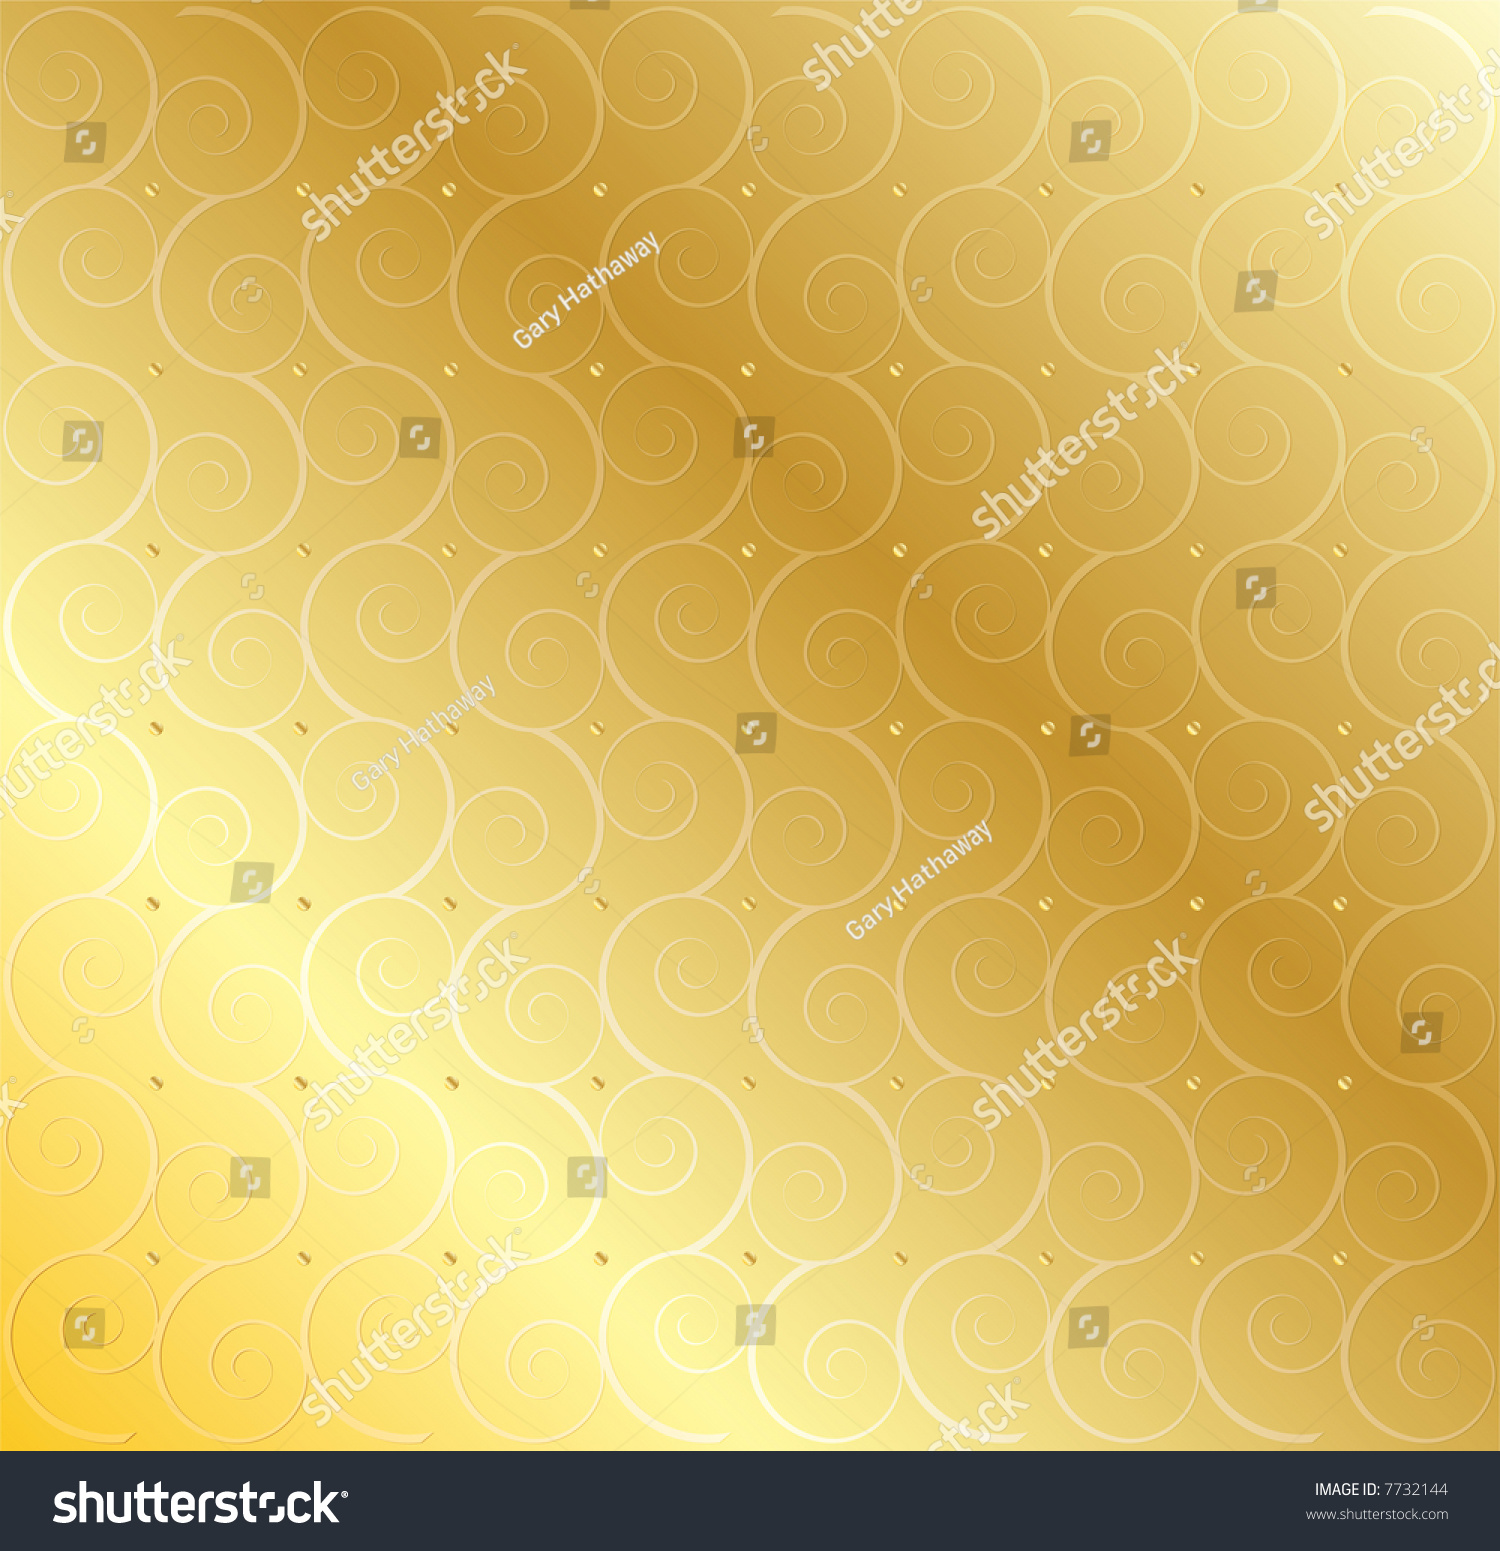 Golden Scrolling Background - Perfect For Any Classy Occasion Stock ...